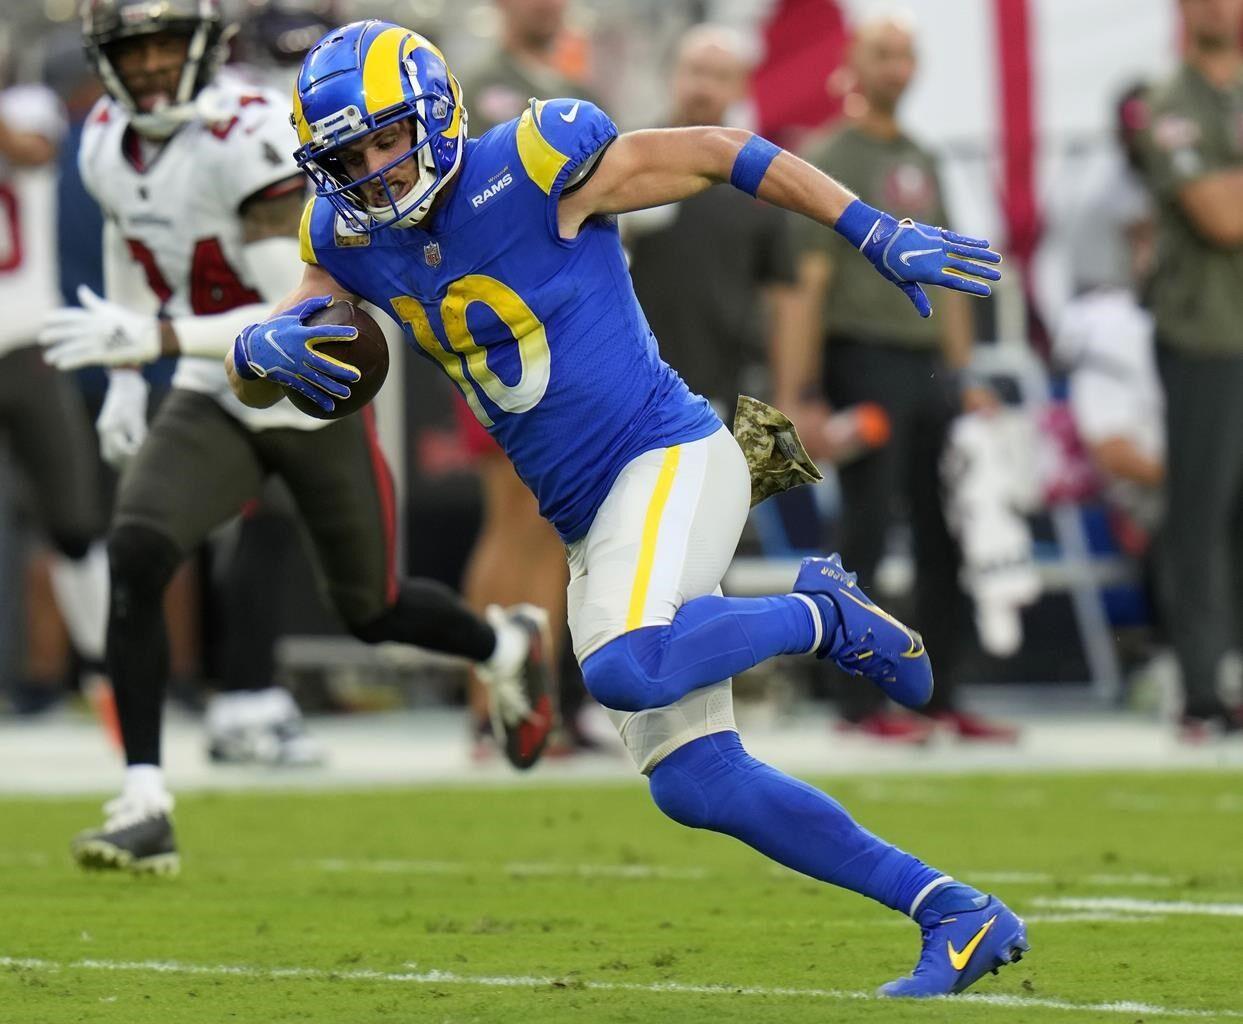 Rams' WR Kupp placed on IR with hamstring injury, will miss four games